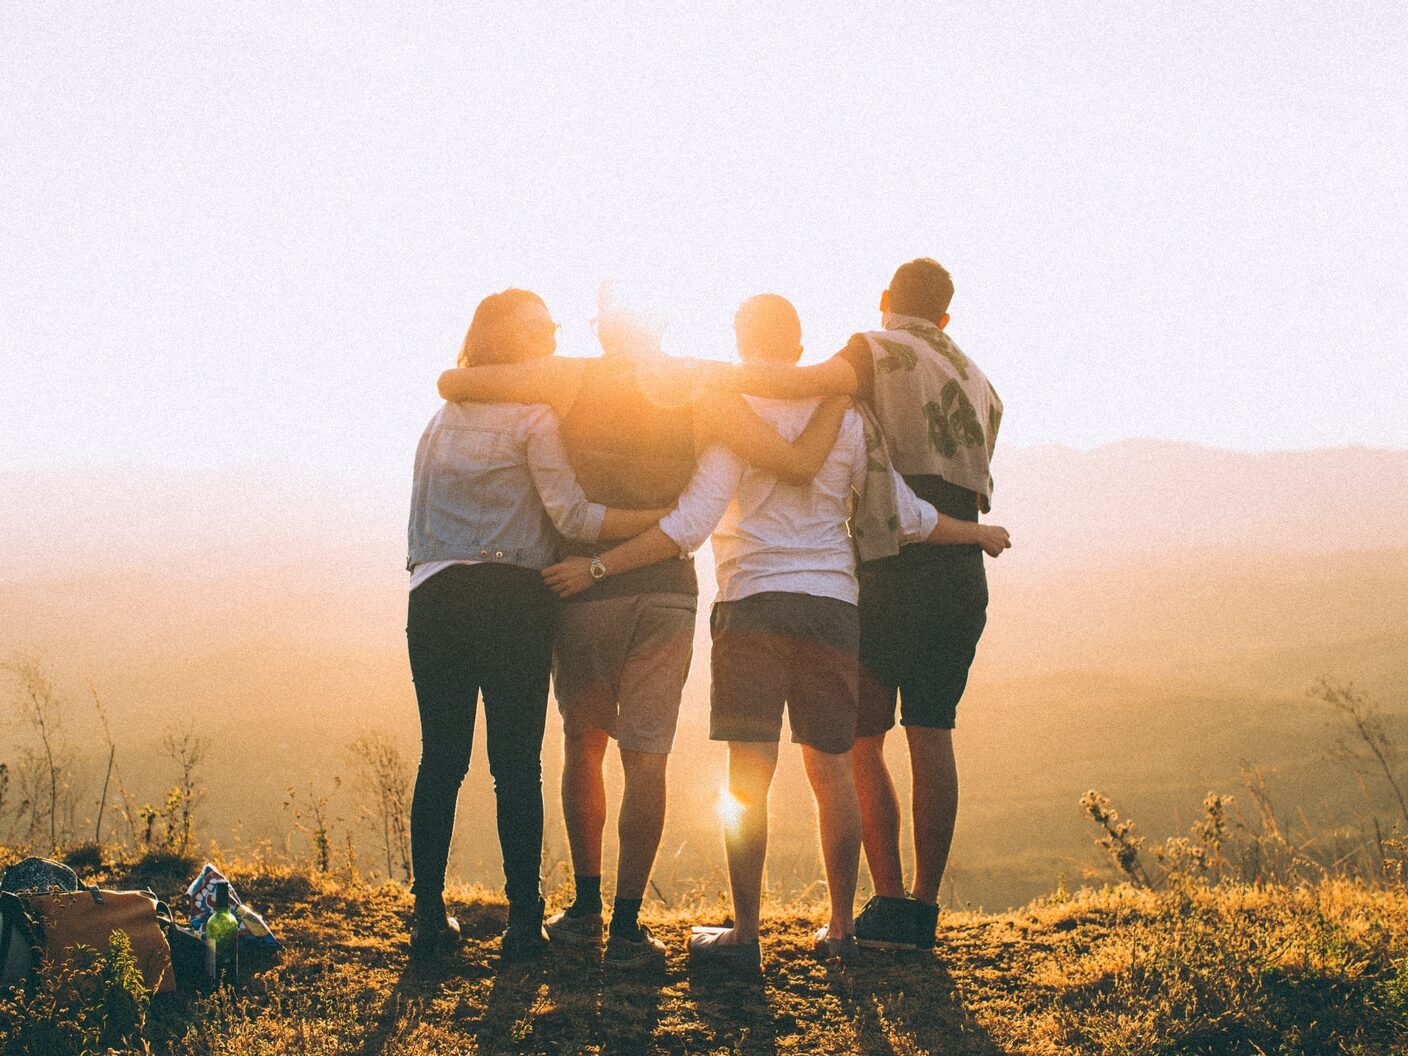 four person hands wrap around shoulders while looking at sunset